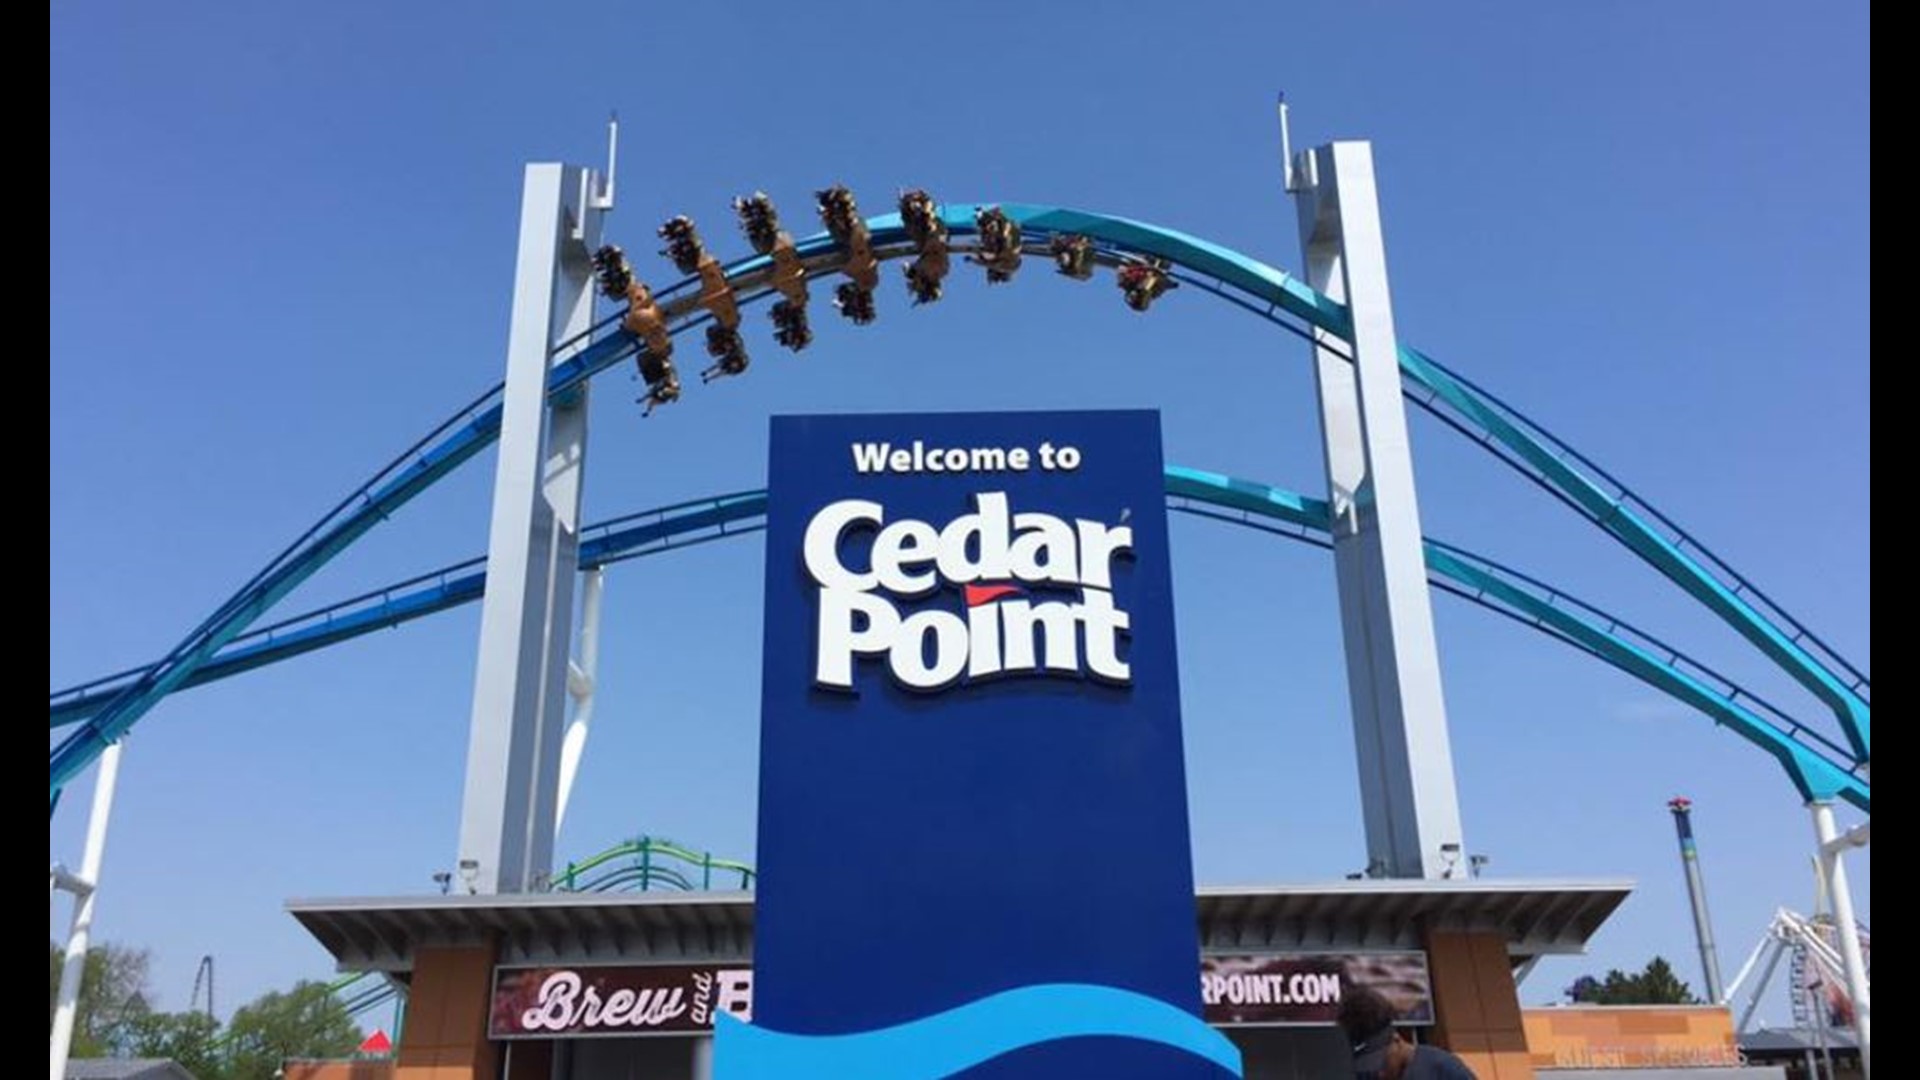 Cedar Point must turn over public records, court rules | 10tv.com